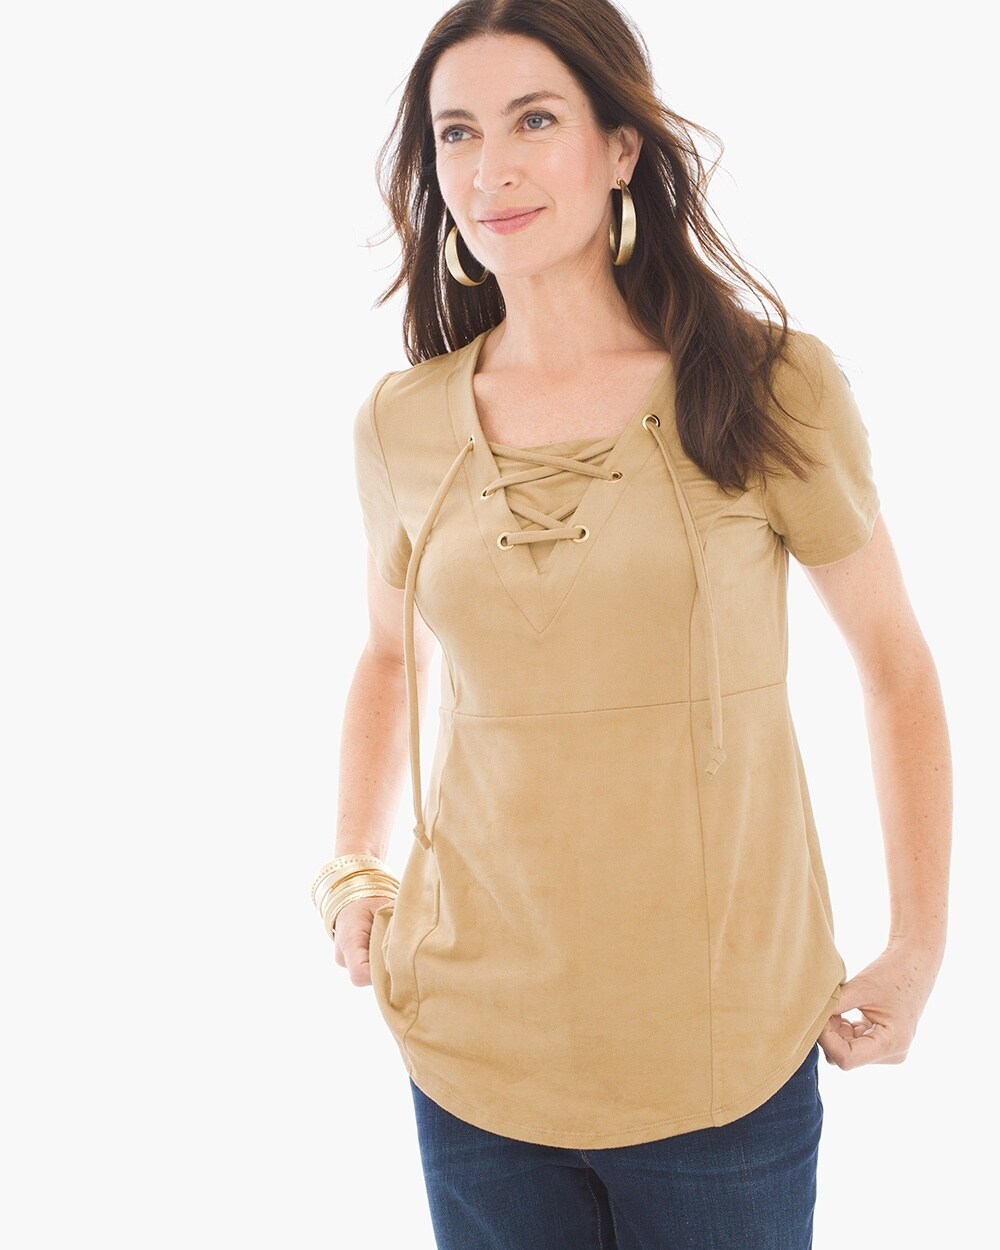 Lace-up Faux-Suede Top in Maple Nut